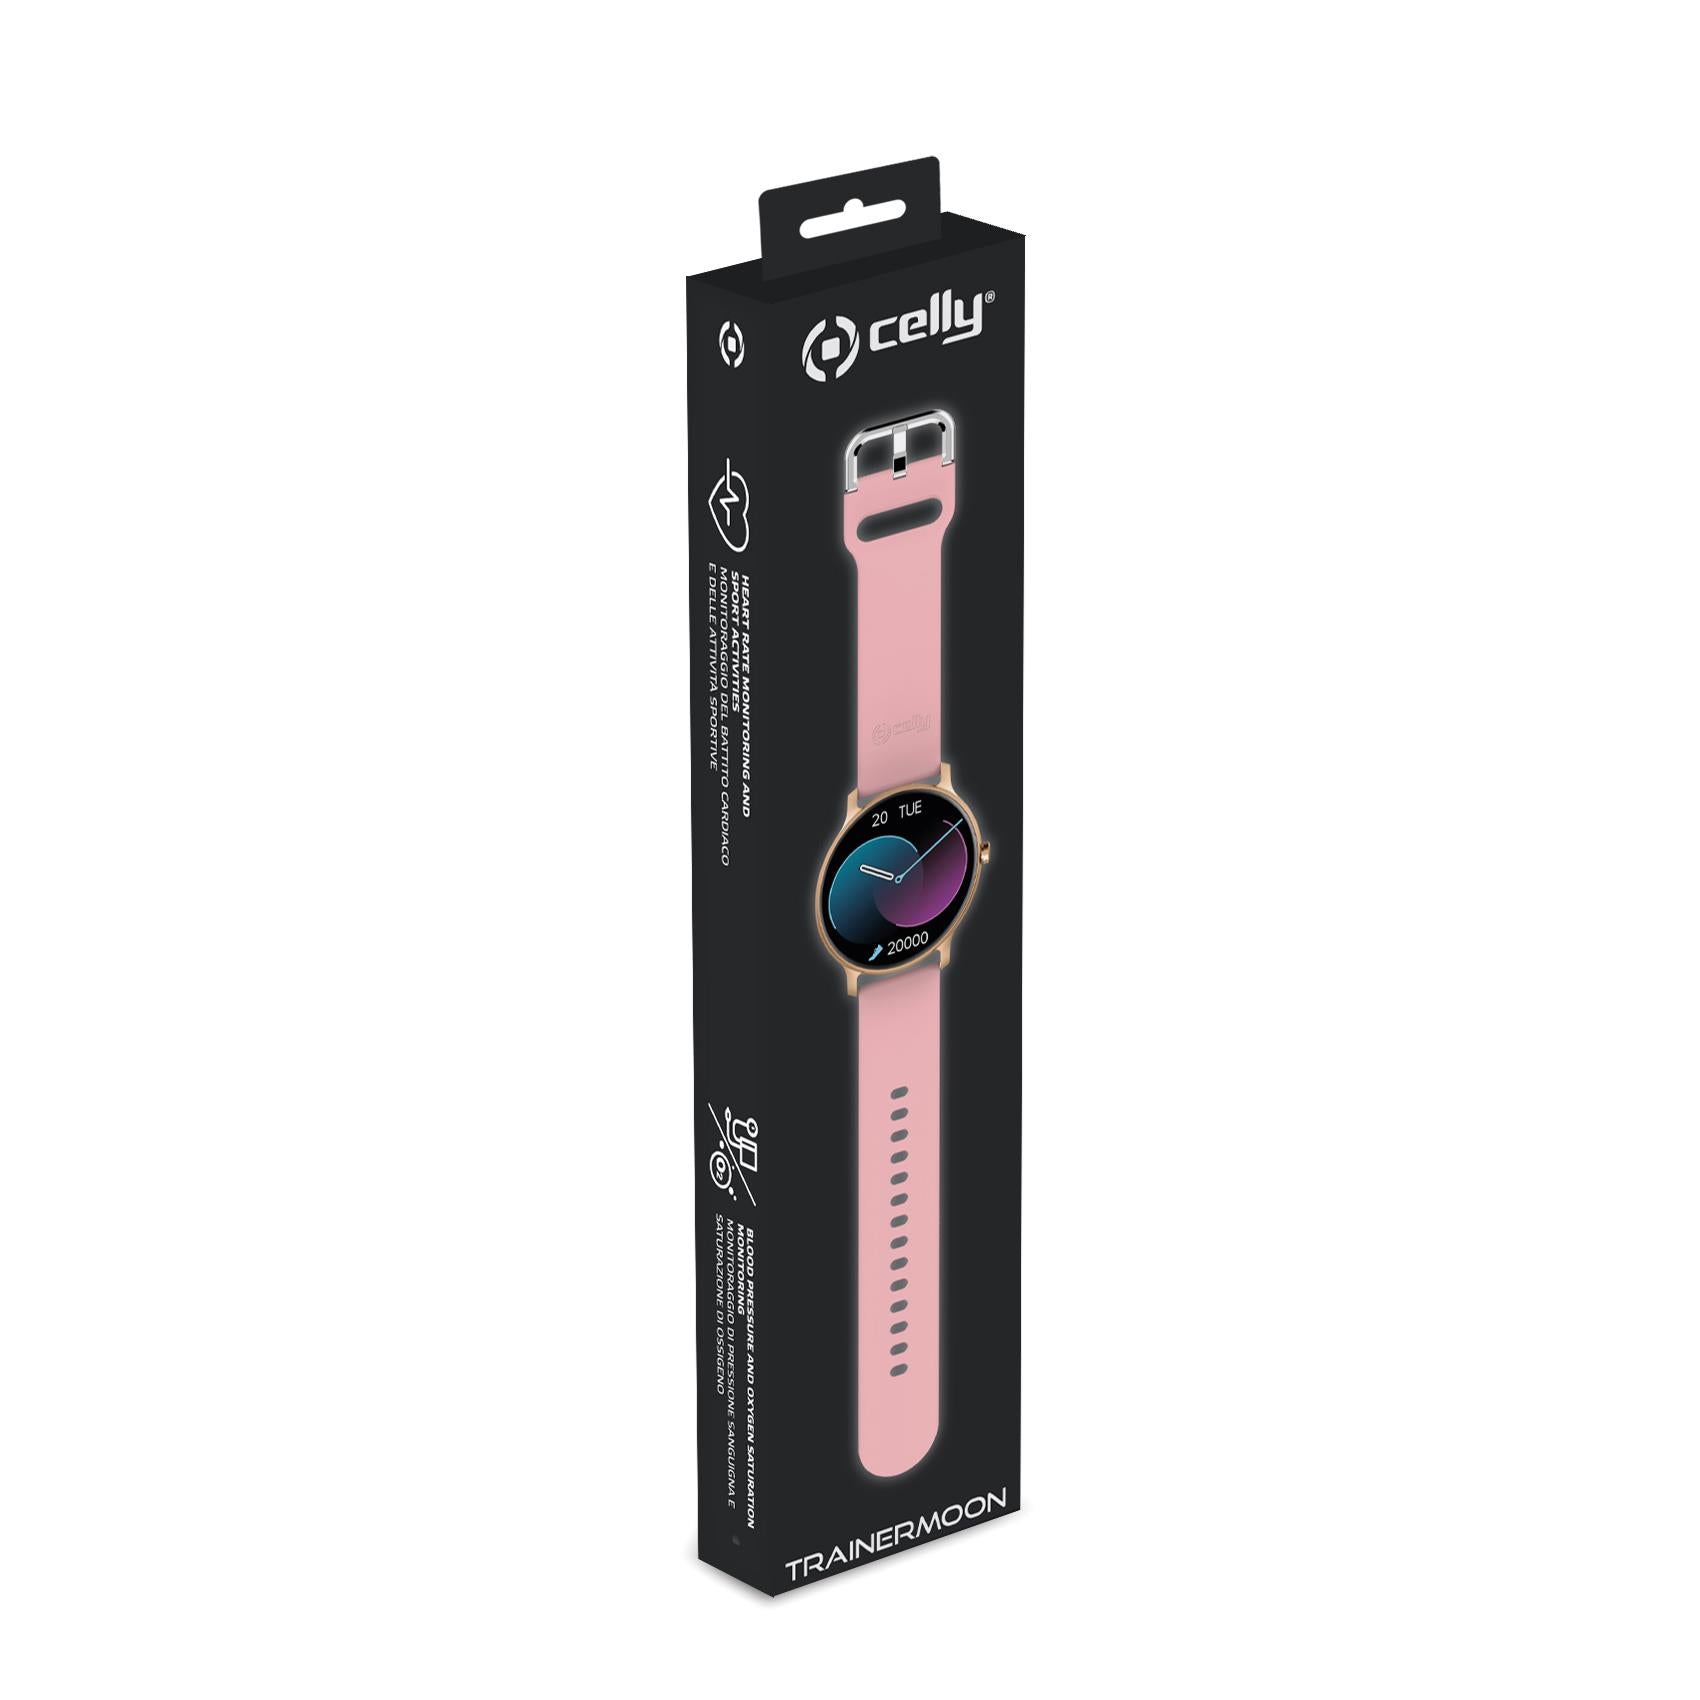 Celly TRAINER SMARTBAND PINK